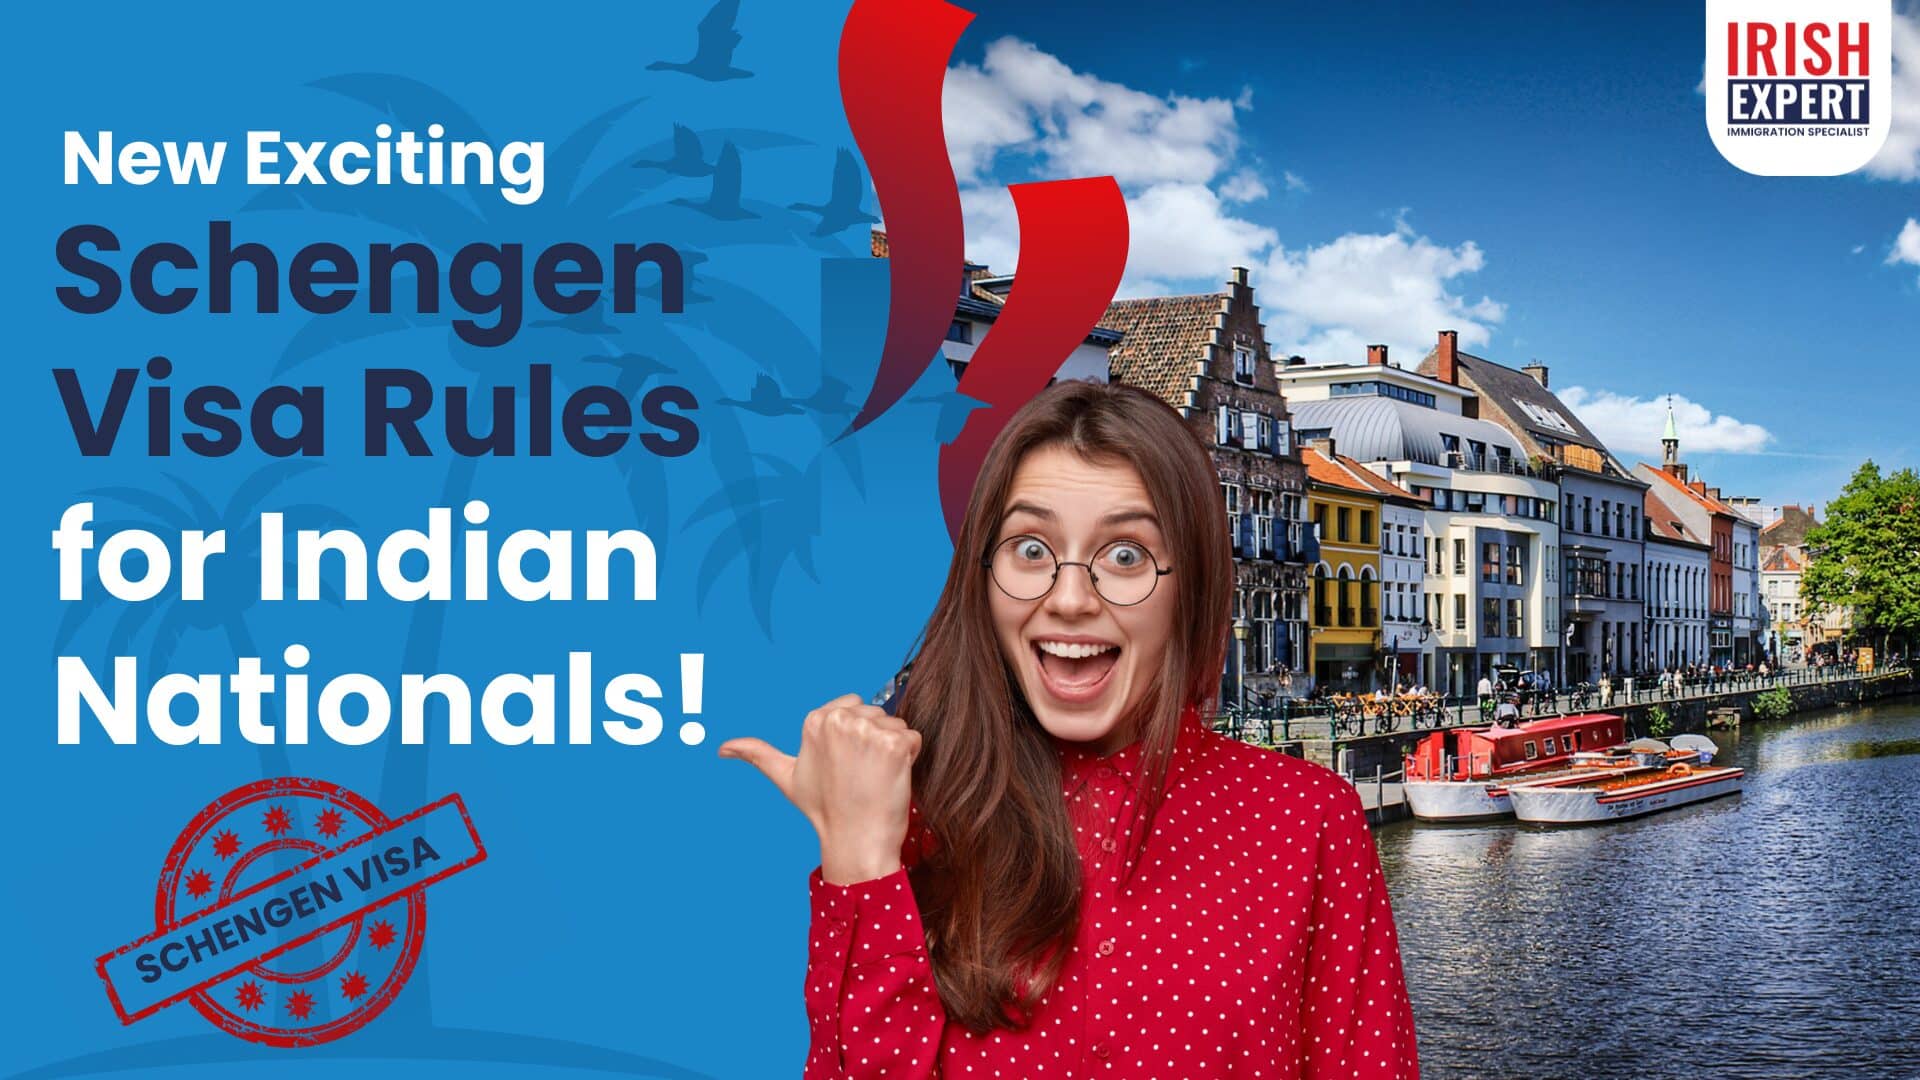 New Exciting Schengen Visa Rules for Indian Nationals!